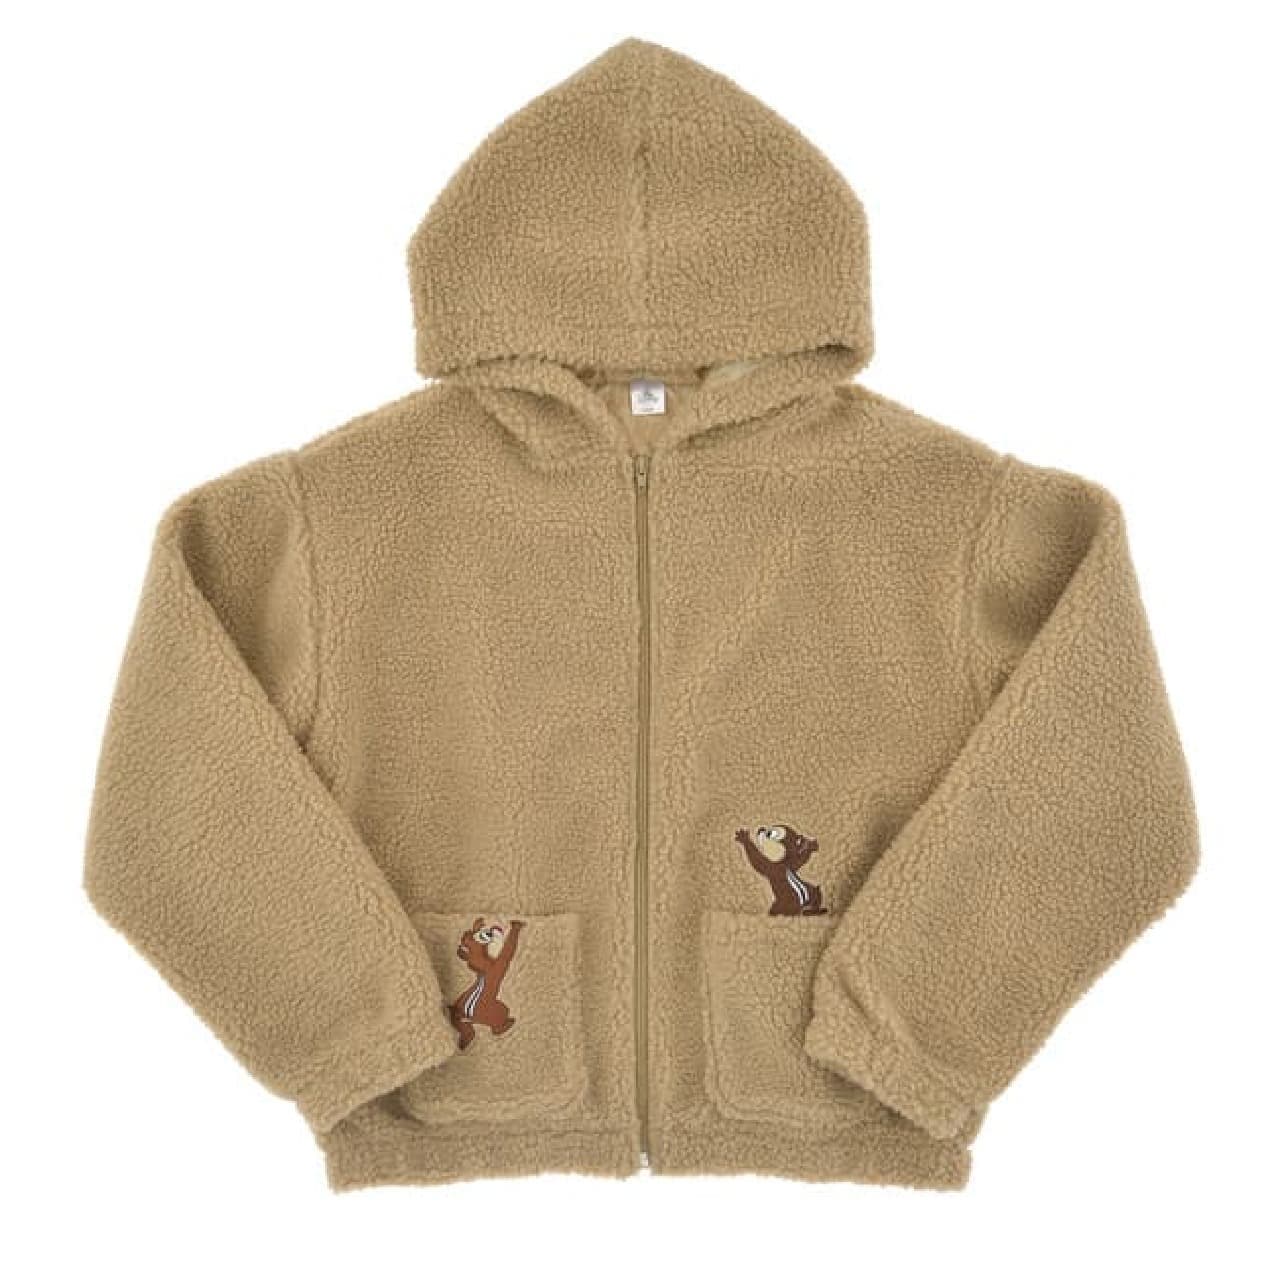 Shop Disney "Chip & Dale" New Products --Hoodies, Blankets, etc. for Fall / Winter